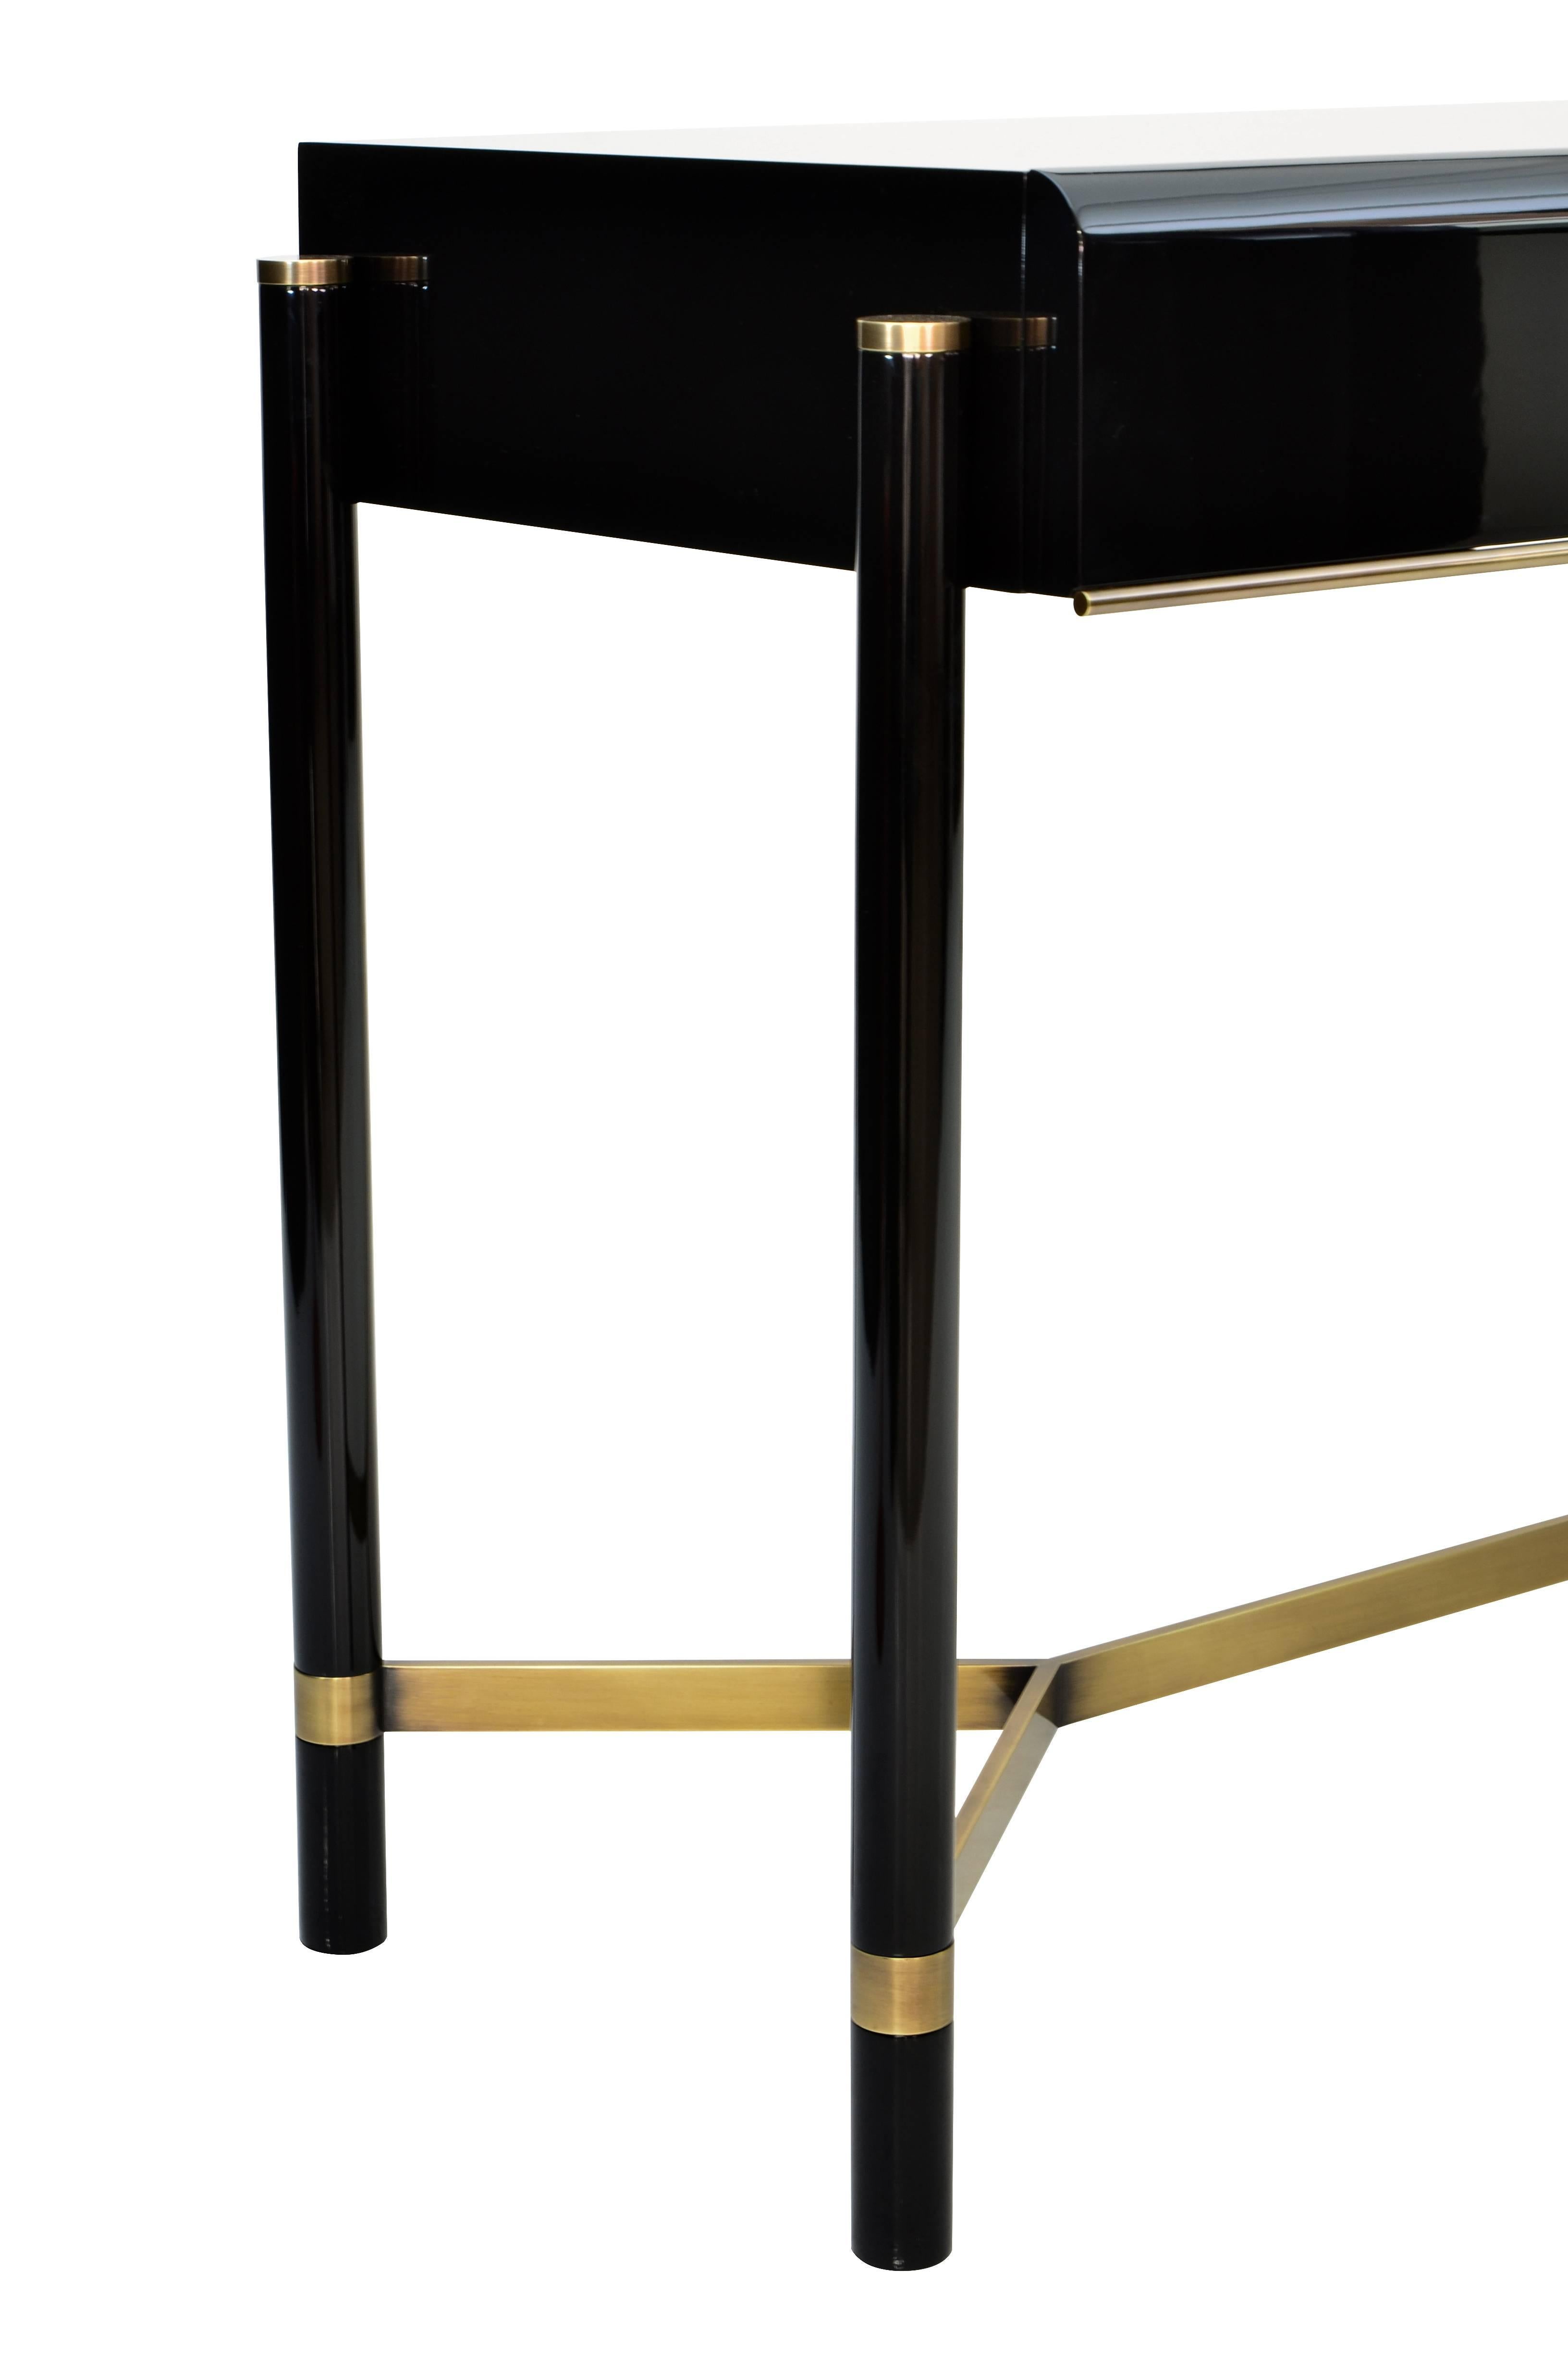 This console table draws inspiration from the 1970s and represents an elegant combination of imbuia hardwood and brass.

Legs in solid wood, veneered or lacquer. Details in solid brass

Finishing: Polyurethane varnish or lacquer, matte, medium